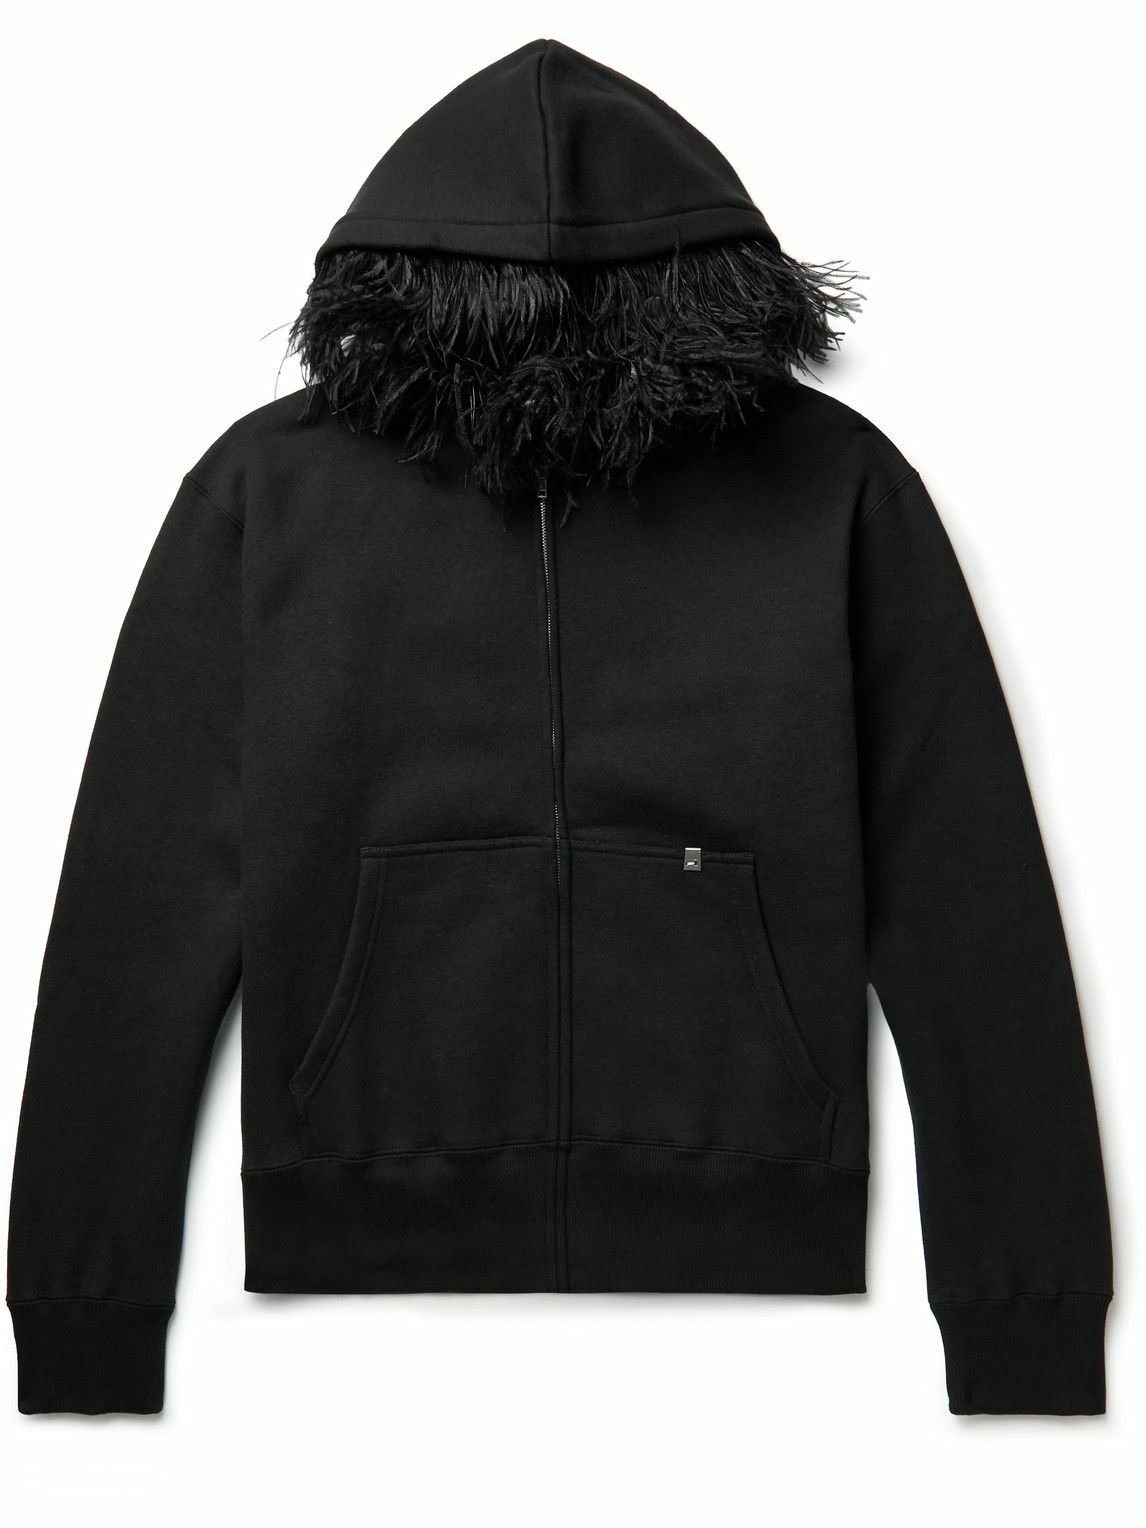 1017 ALYX 9SM - Feather-Trimmed Cotton-Jersey Zip-Up Hoodie - Black